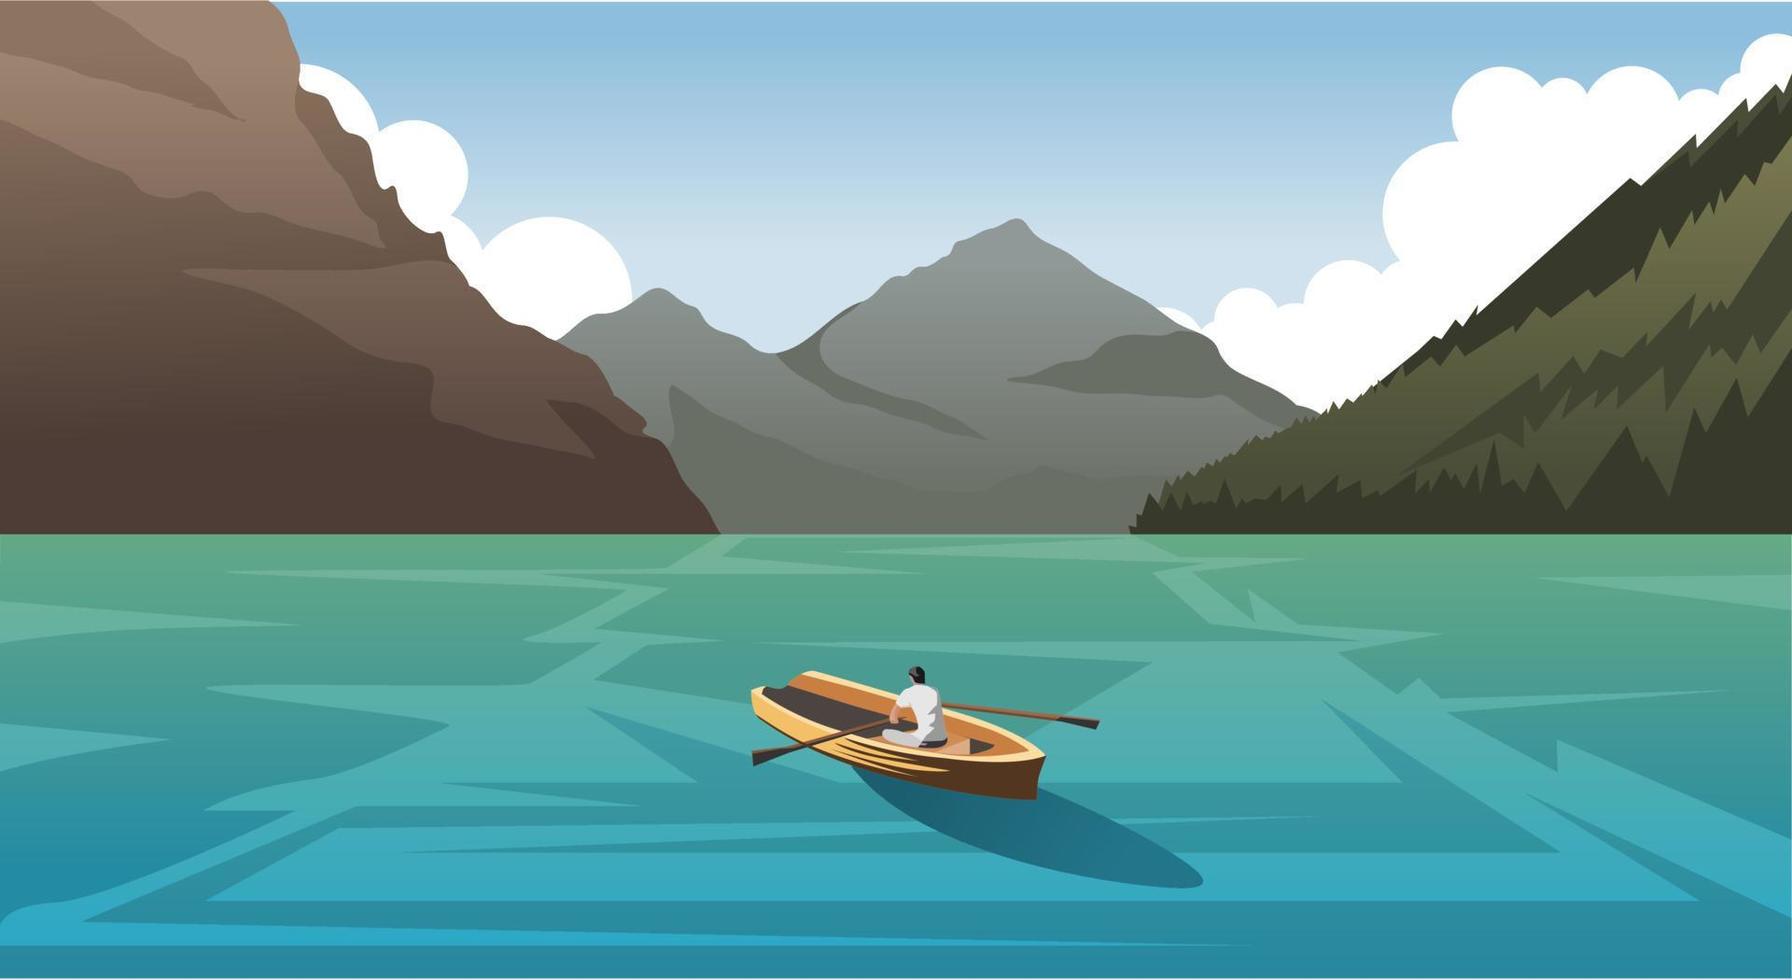 Natural scenery of the sea, hills, mountains and people on boats vector